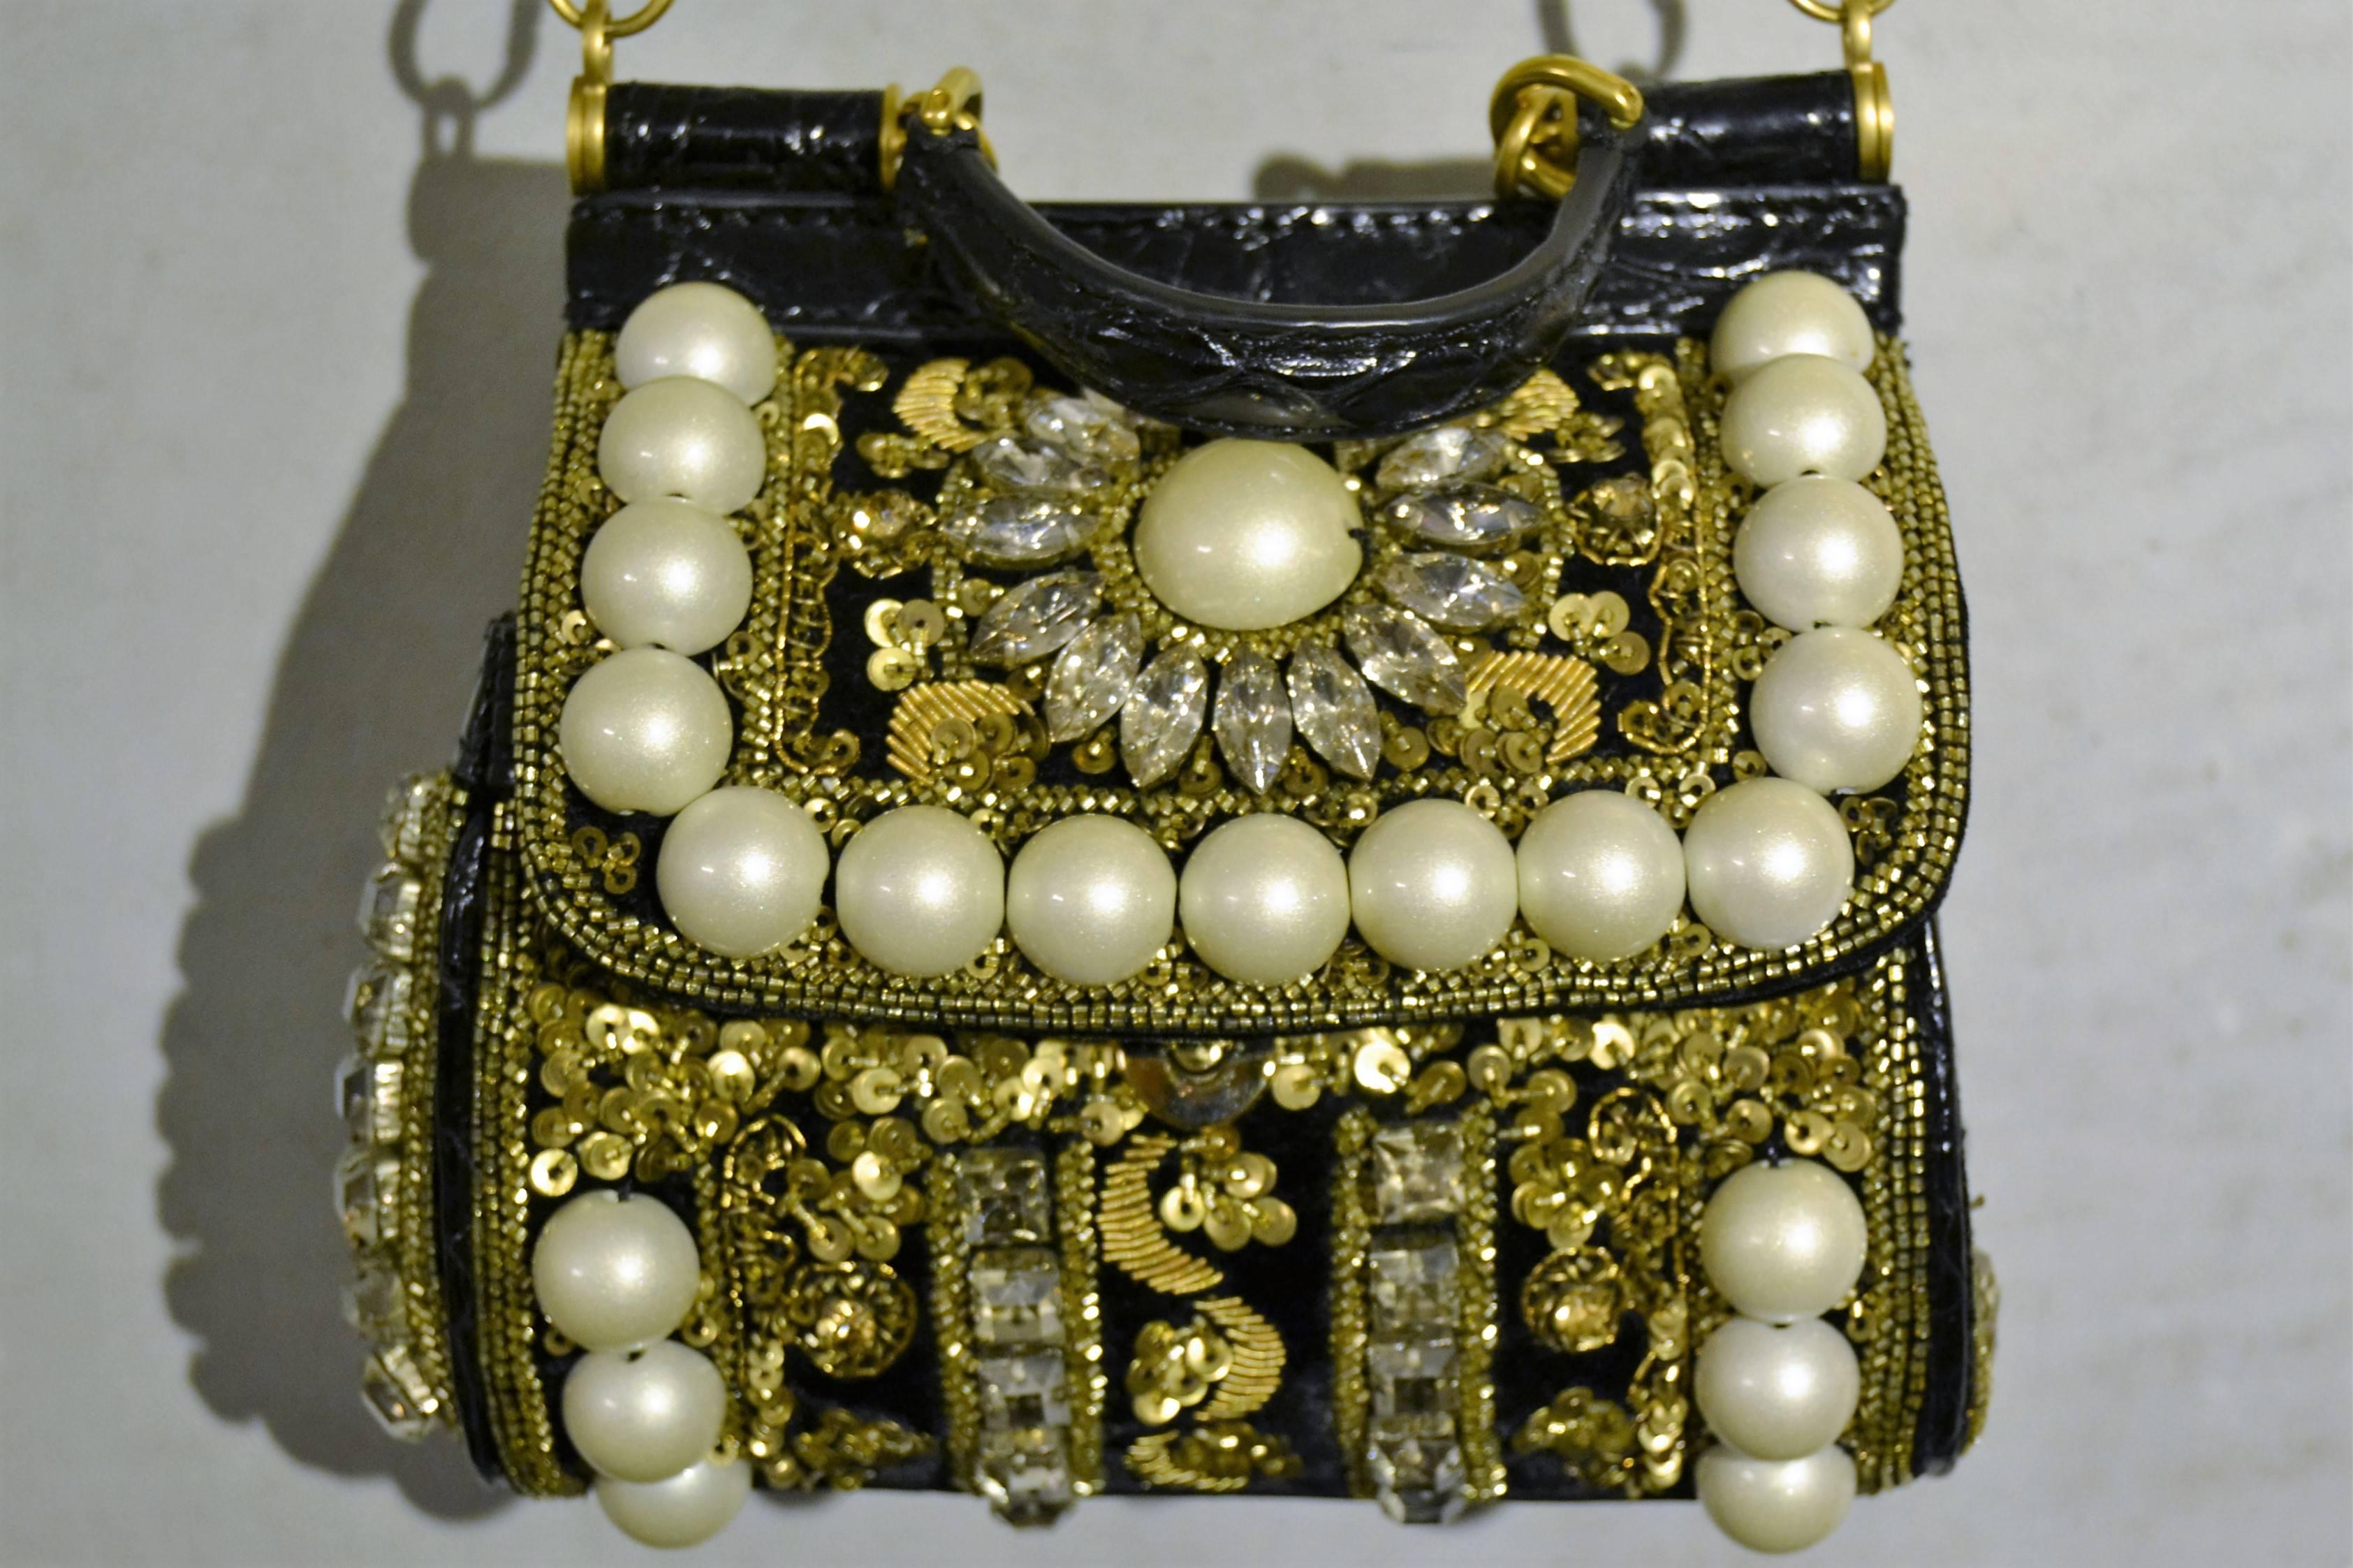 Brown 2014 Dolce & Gabbana Small Sicily bag with pearls